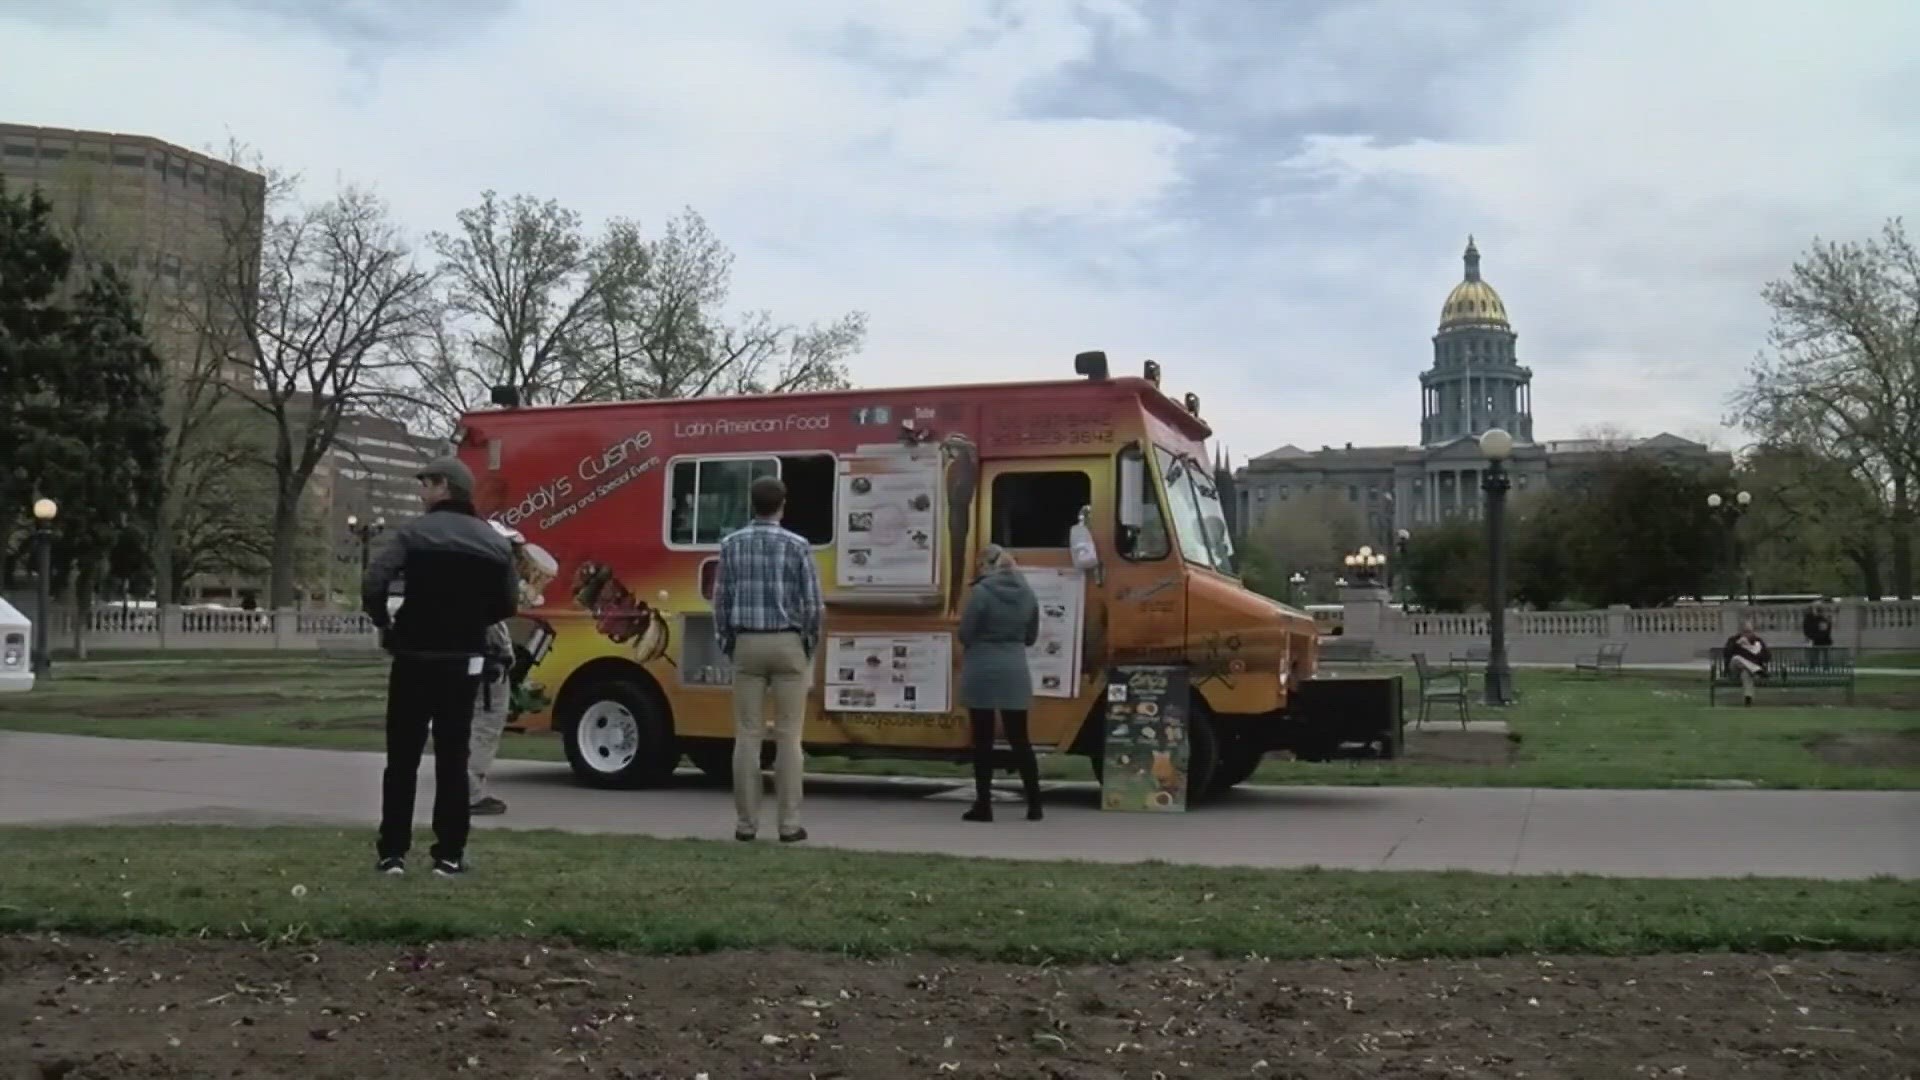 The annual food truck event at Civic Center Park brings a variety of Denver's best mobile restaurants together for lunch throughout the summer.